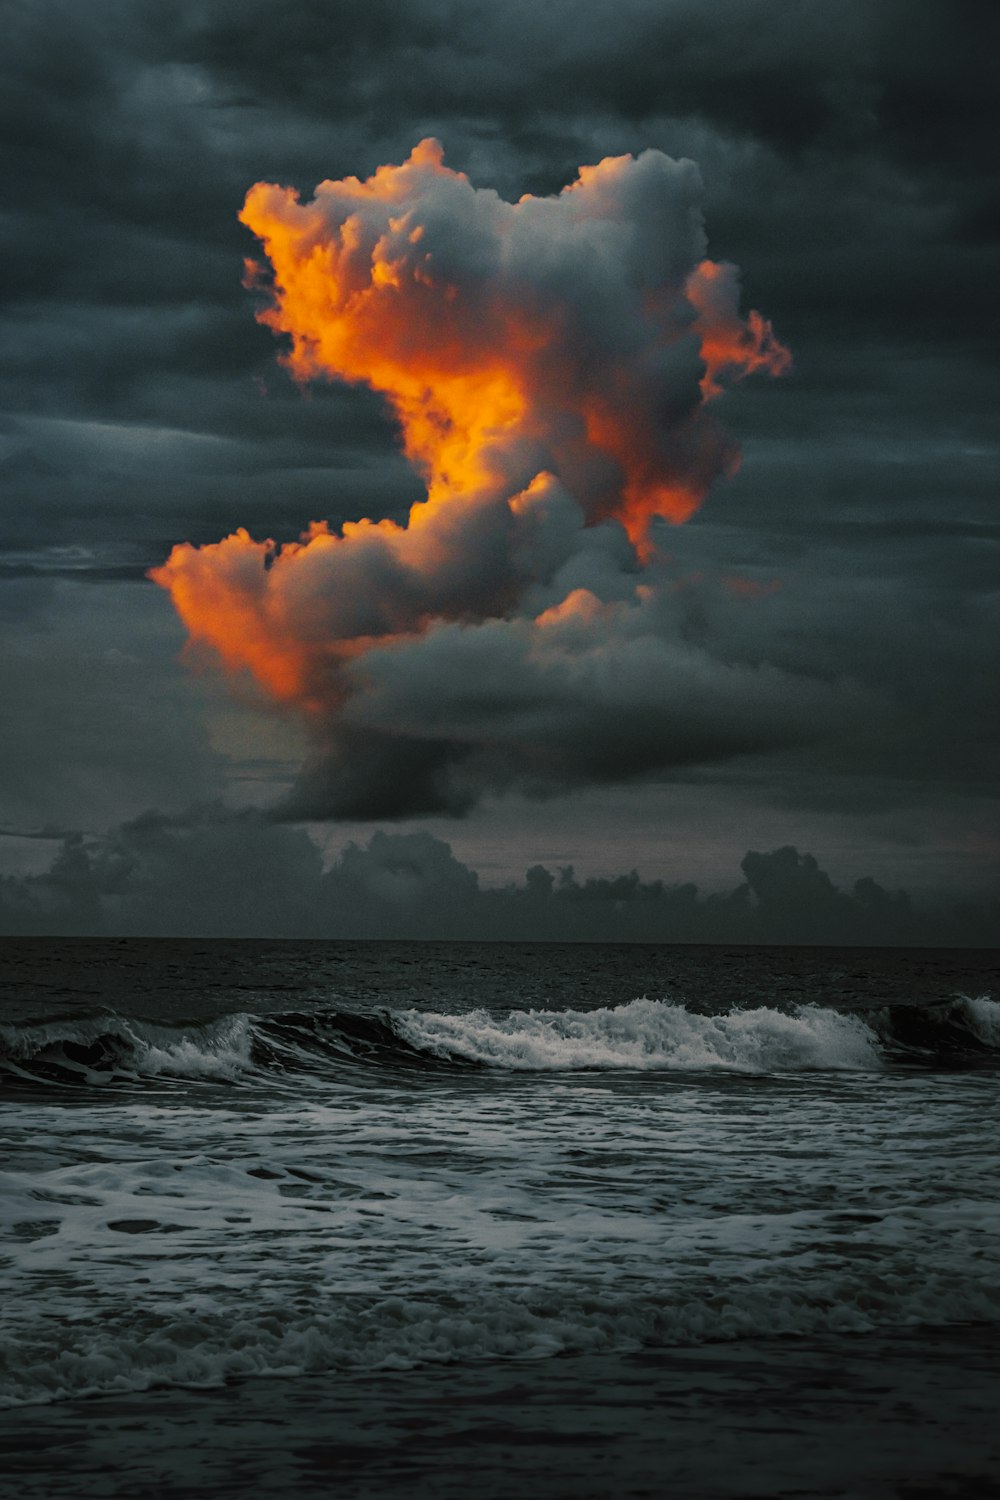 a large explosion in the ocean